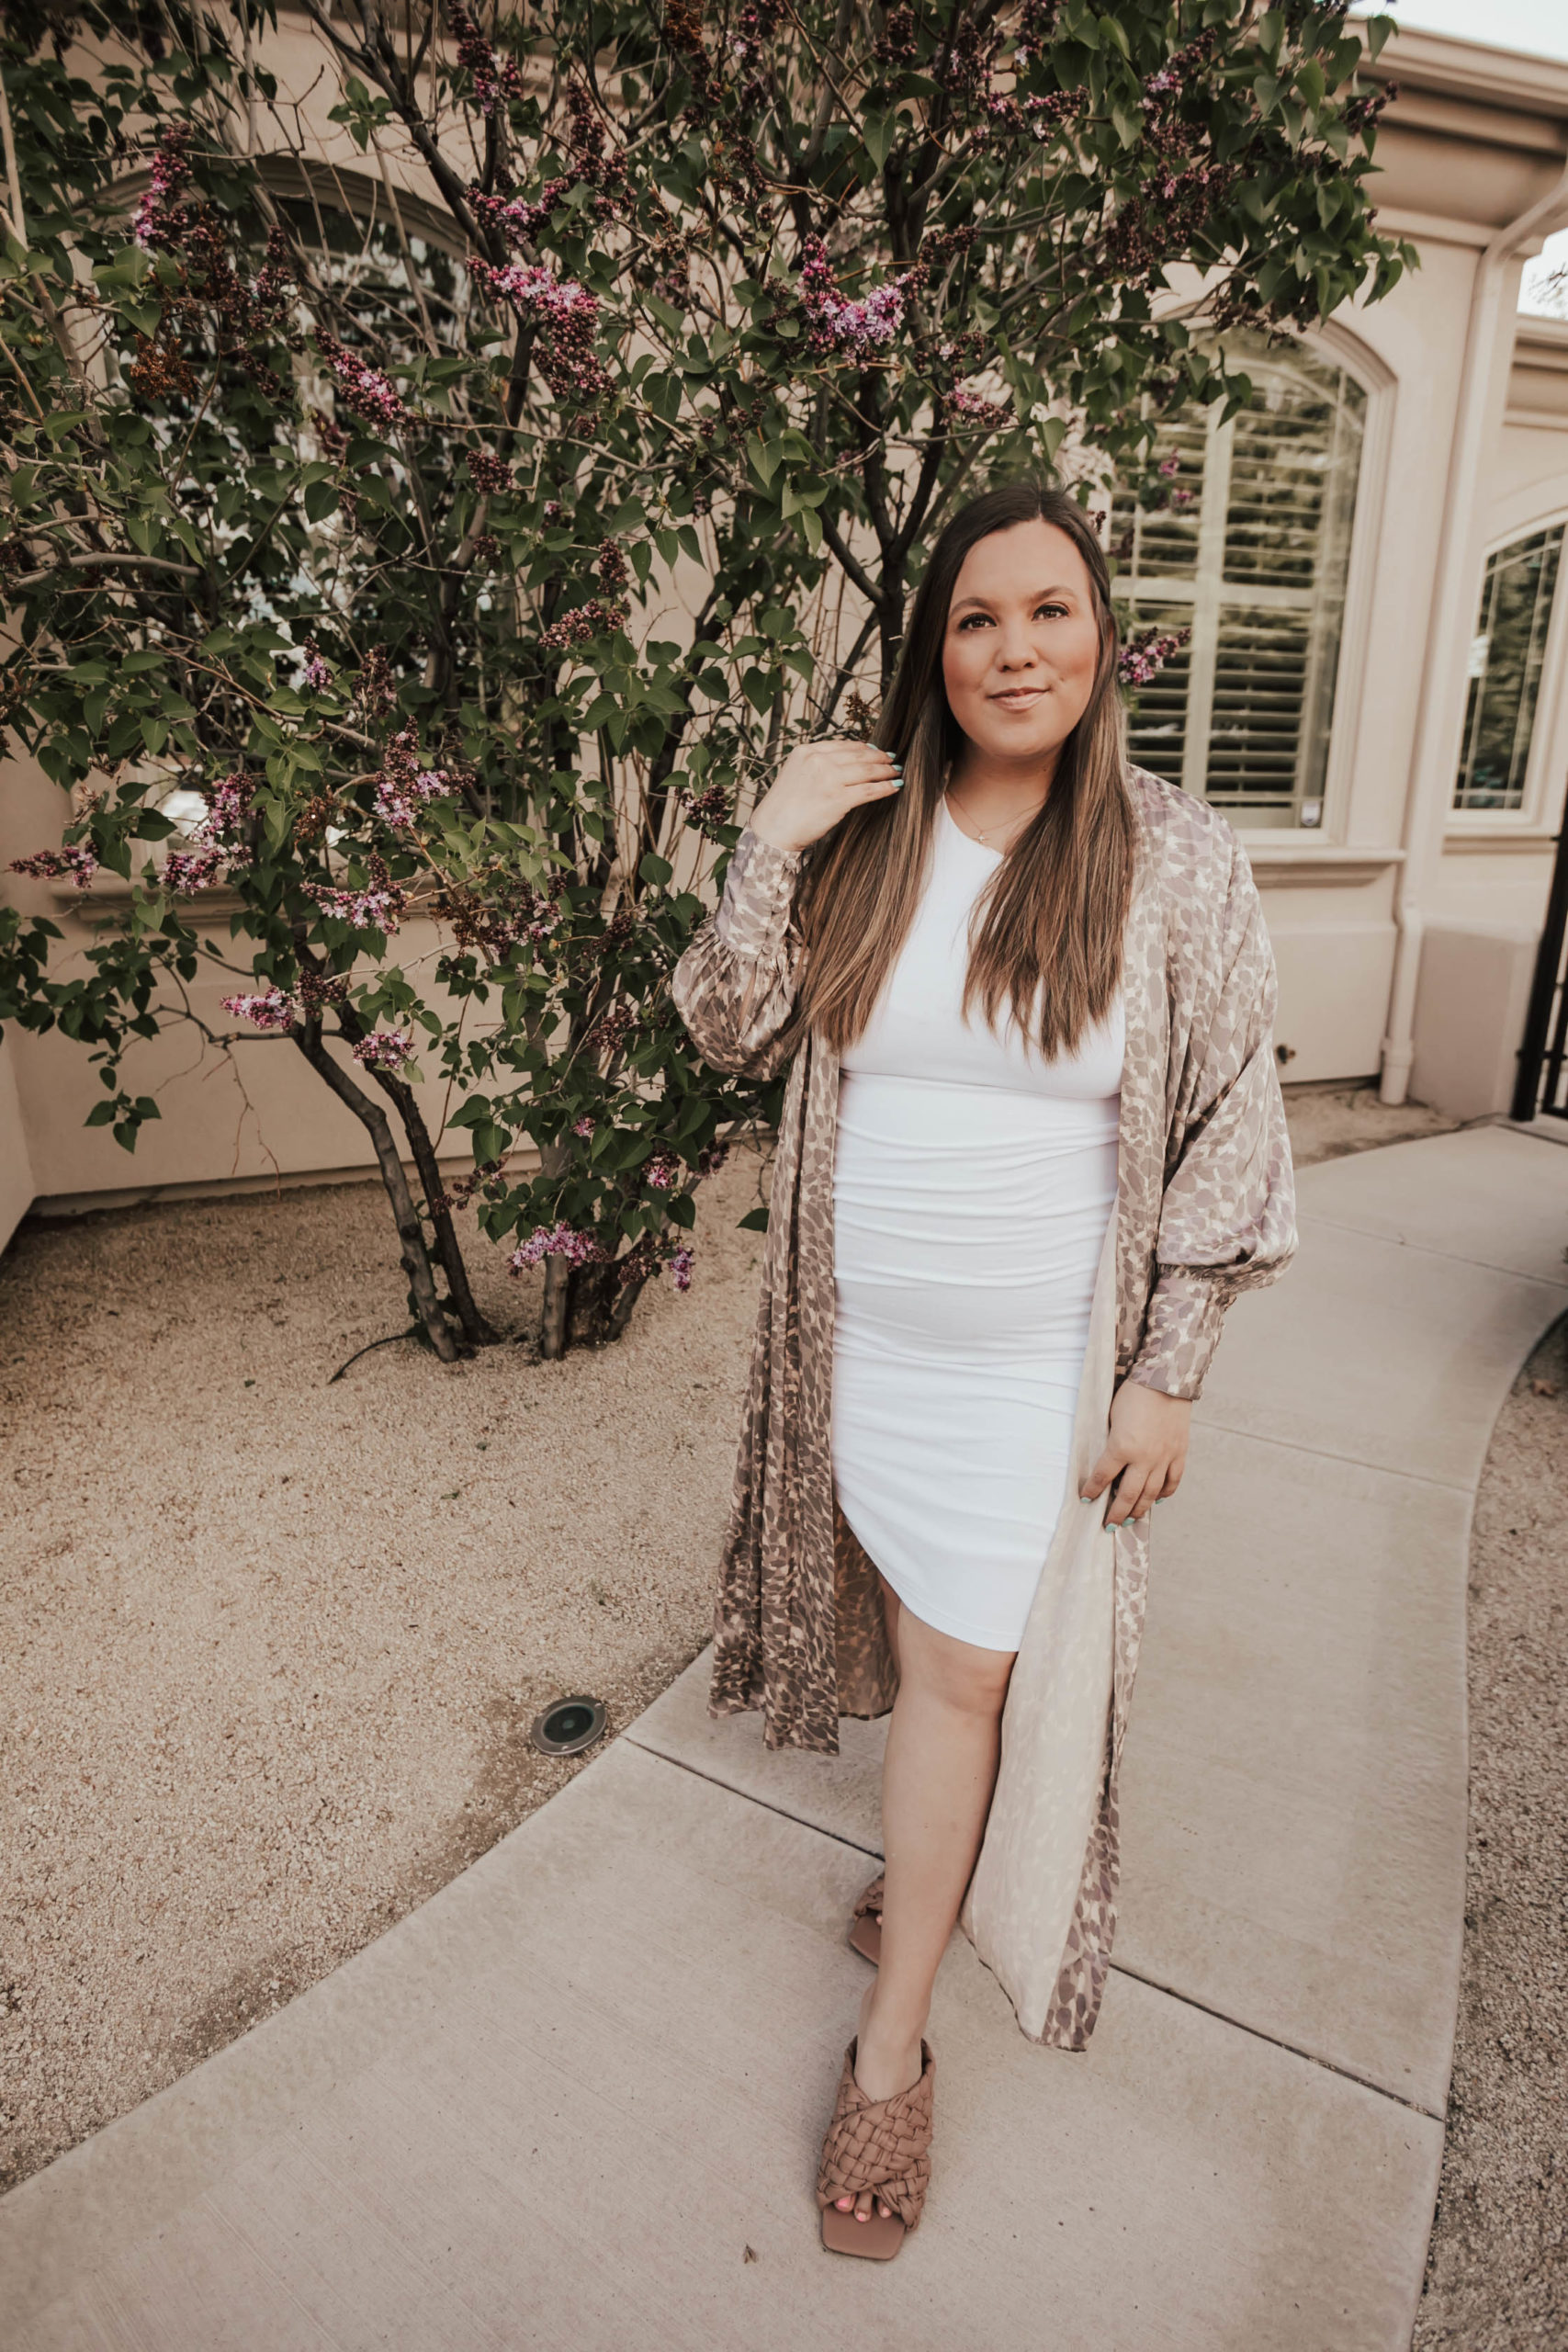 Reno blogger, Ashley Zeal Hurd, from the Ashley and Emily blog shares her First Trimester Diary round two - all the signs & symptoms!